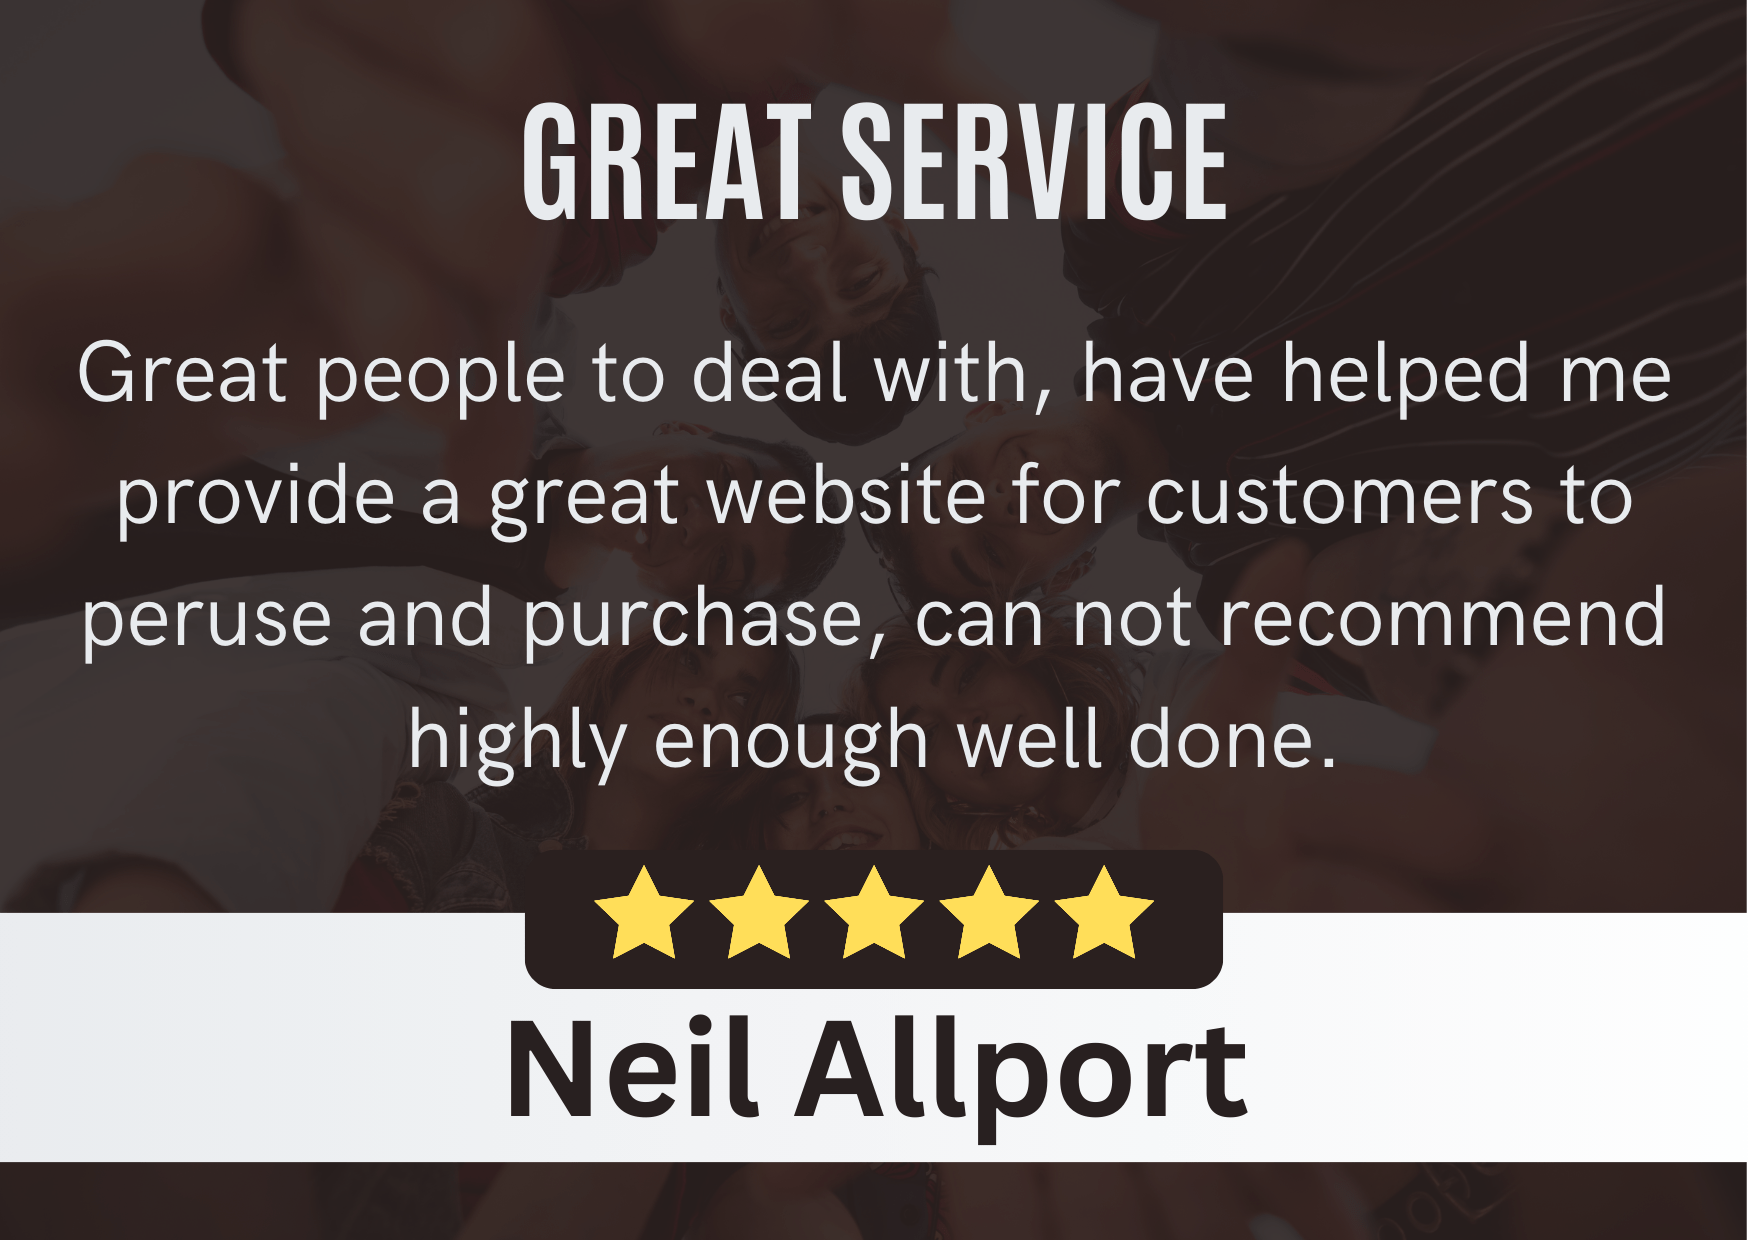 Neil Allport - Edworthy Media Review | PPC Agency Web Design Services Exeter. Review Content: Great people to deal with, have helped me provide a great website for customers to peruse and purchase, can not recommend highly enough well done.